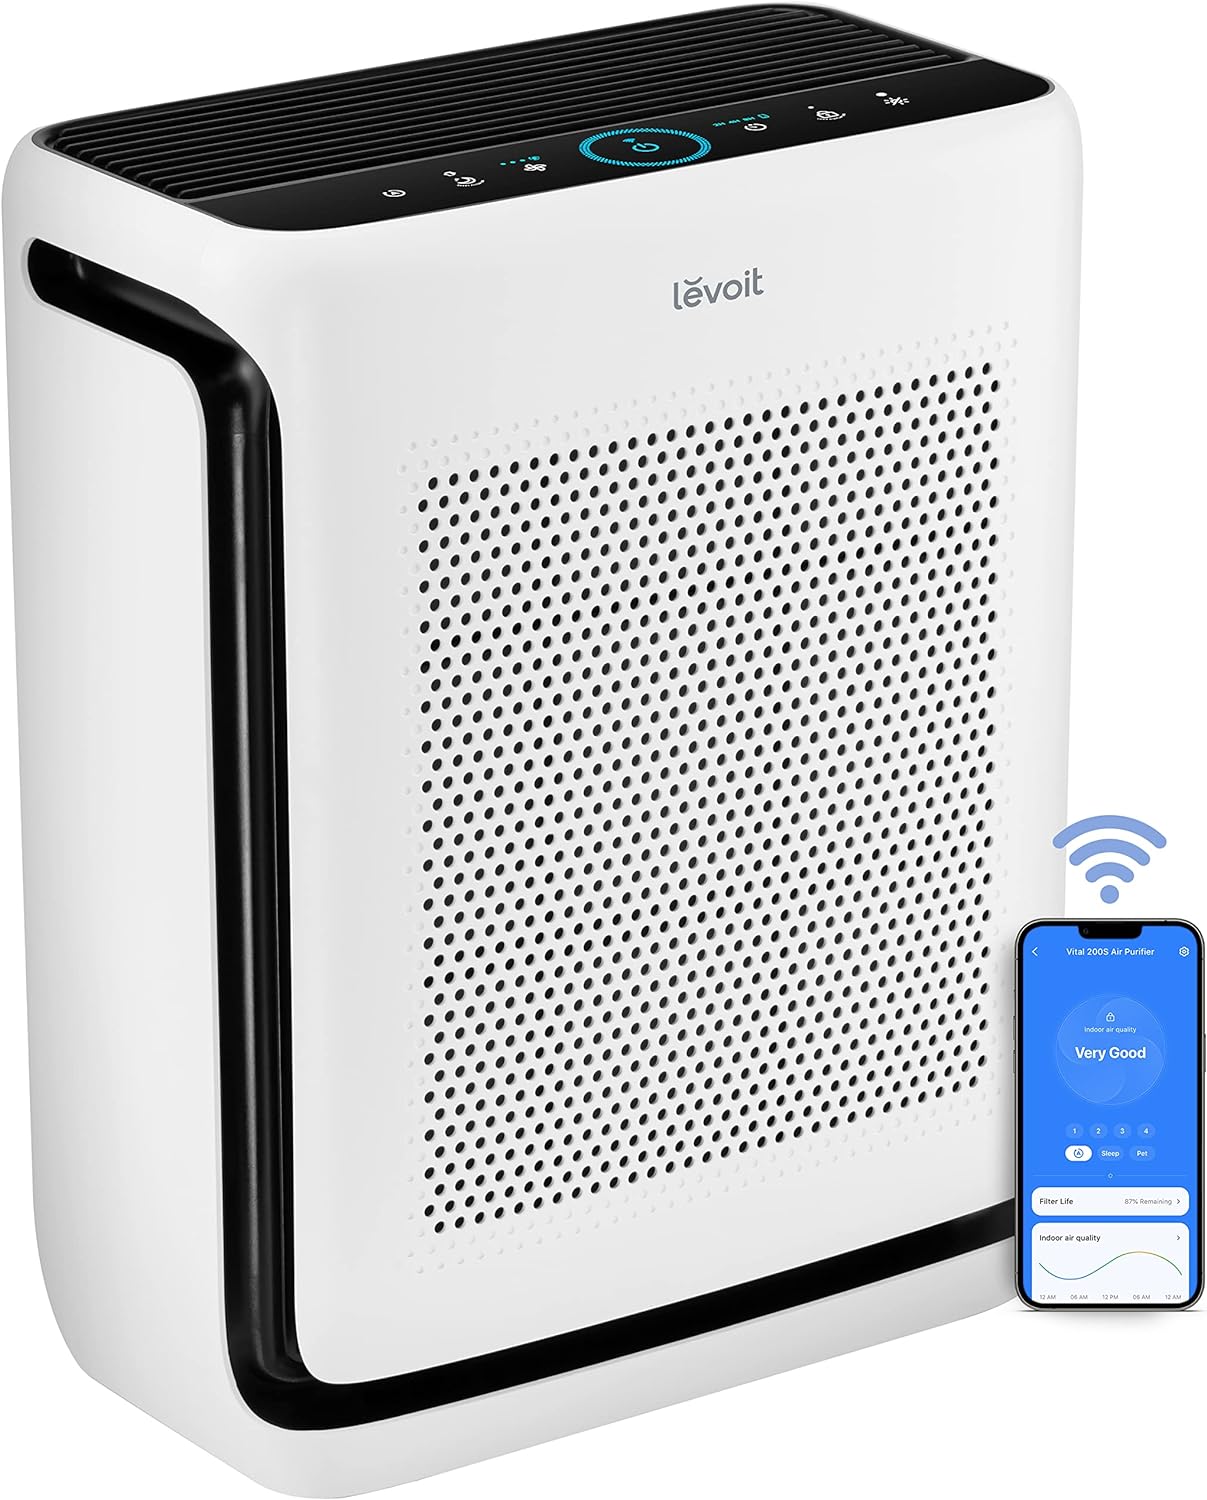 LEVOIT Air Purifiers for Home Large Room Up to 1900 Ft in 1 Hr with Washable Filters, Air Quality Monitor, Smart WiFi, HEPA Filter Captures Allergies, Pet Hair, Smoke, Pollen in Bedroom, Vital 200S